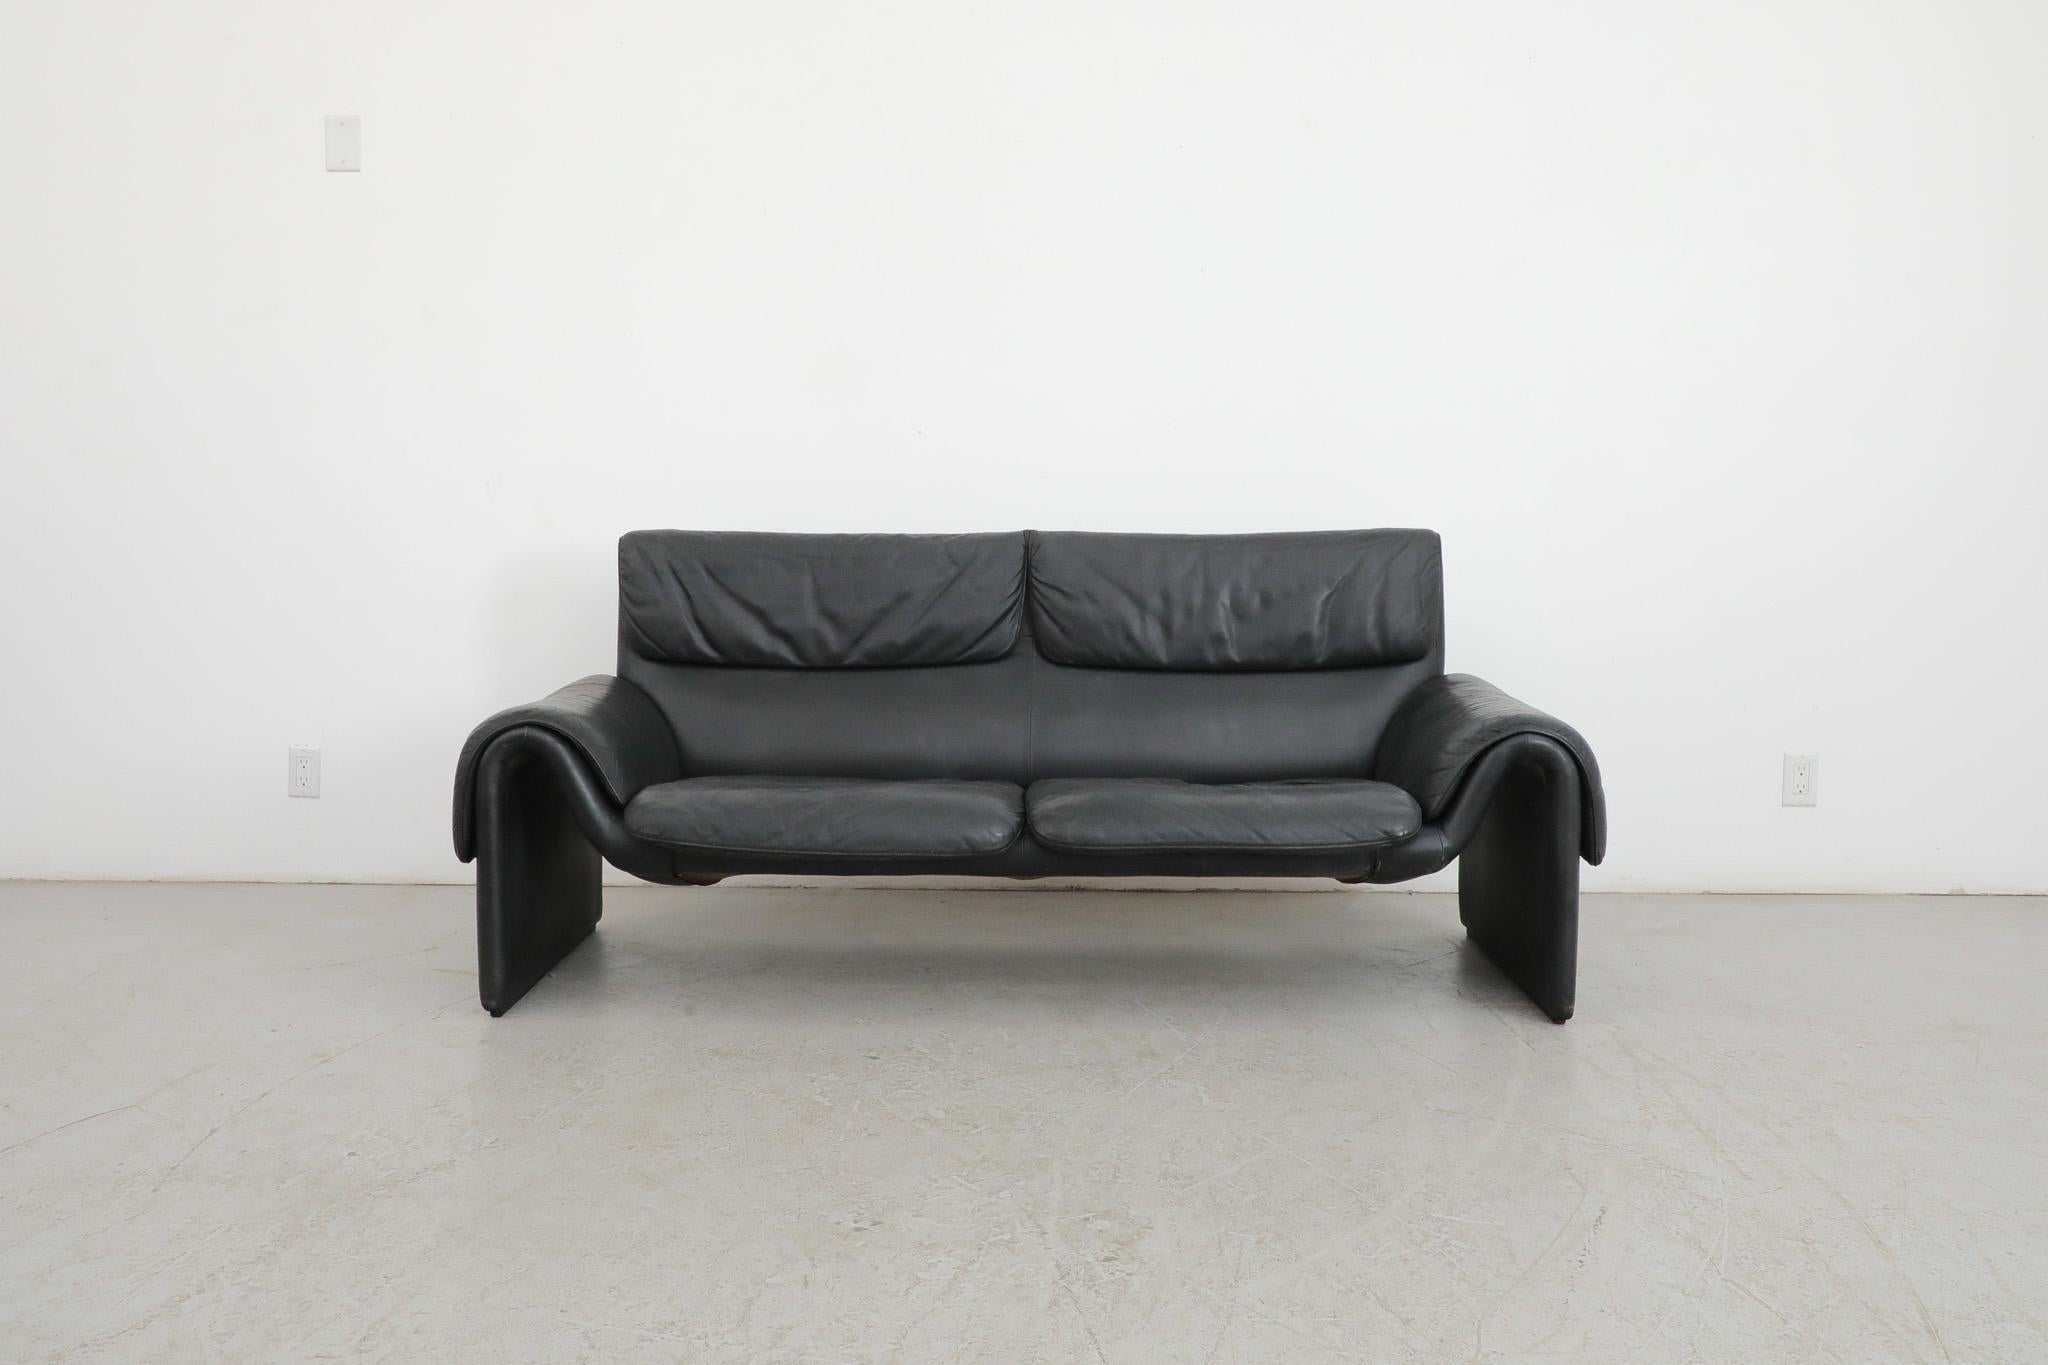 Handsome 1980's black leather De Sede 'DS2011' two seater sofa with dramatic swooping armrests that are integrated with its curvy frame. Sleek and super stylish sofa with lovely patina and some visible wear consistent with its age and use.  